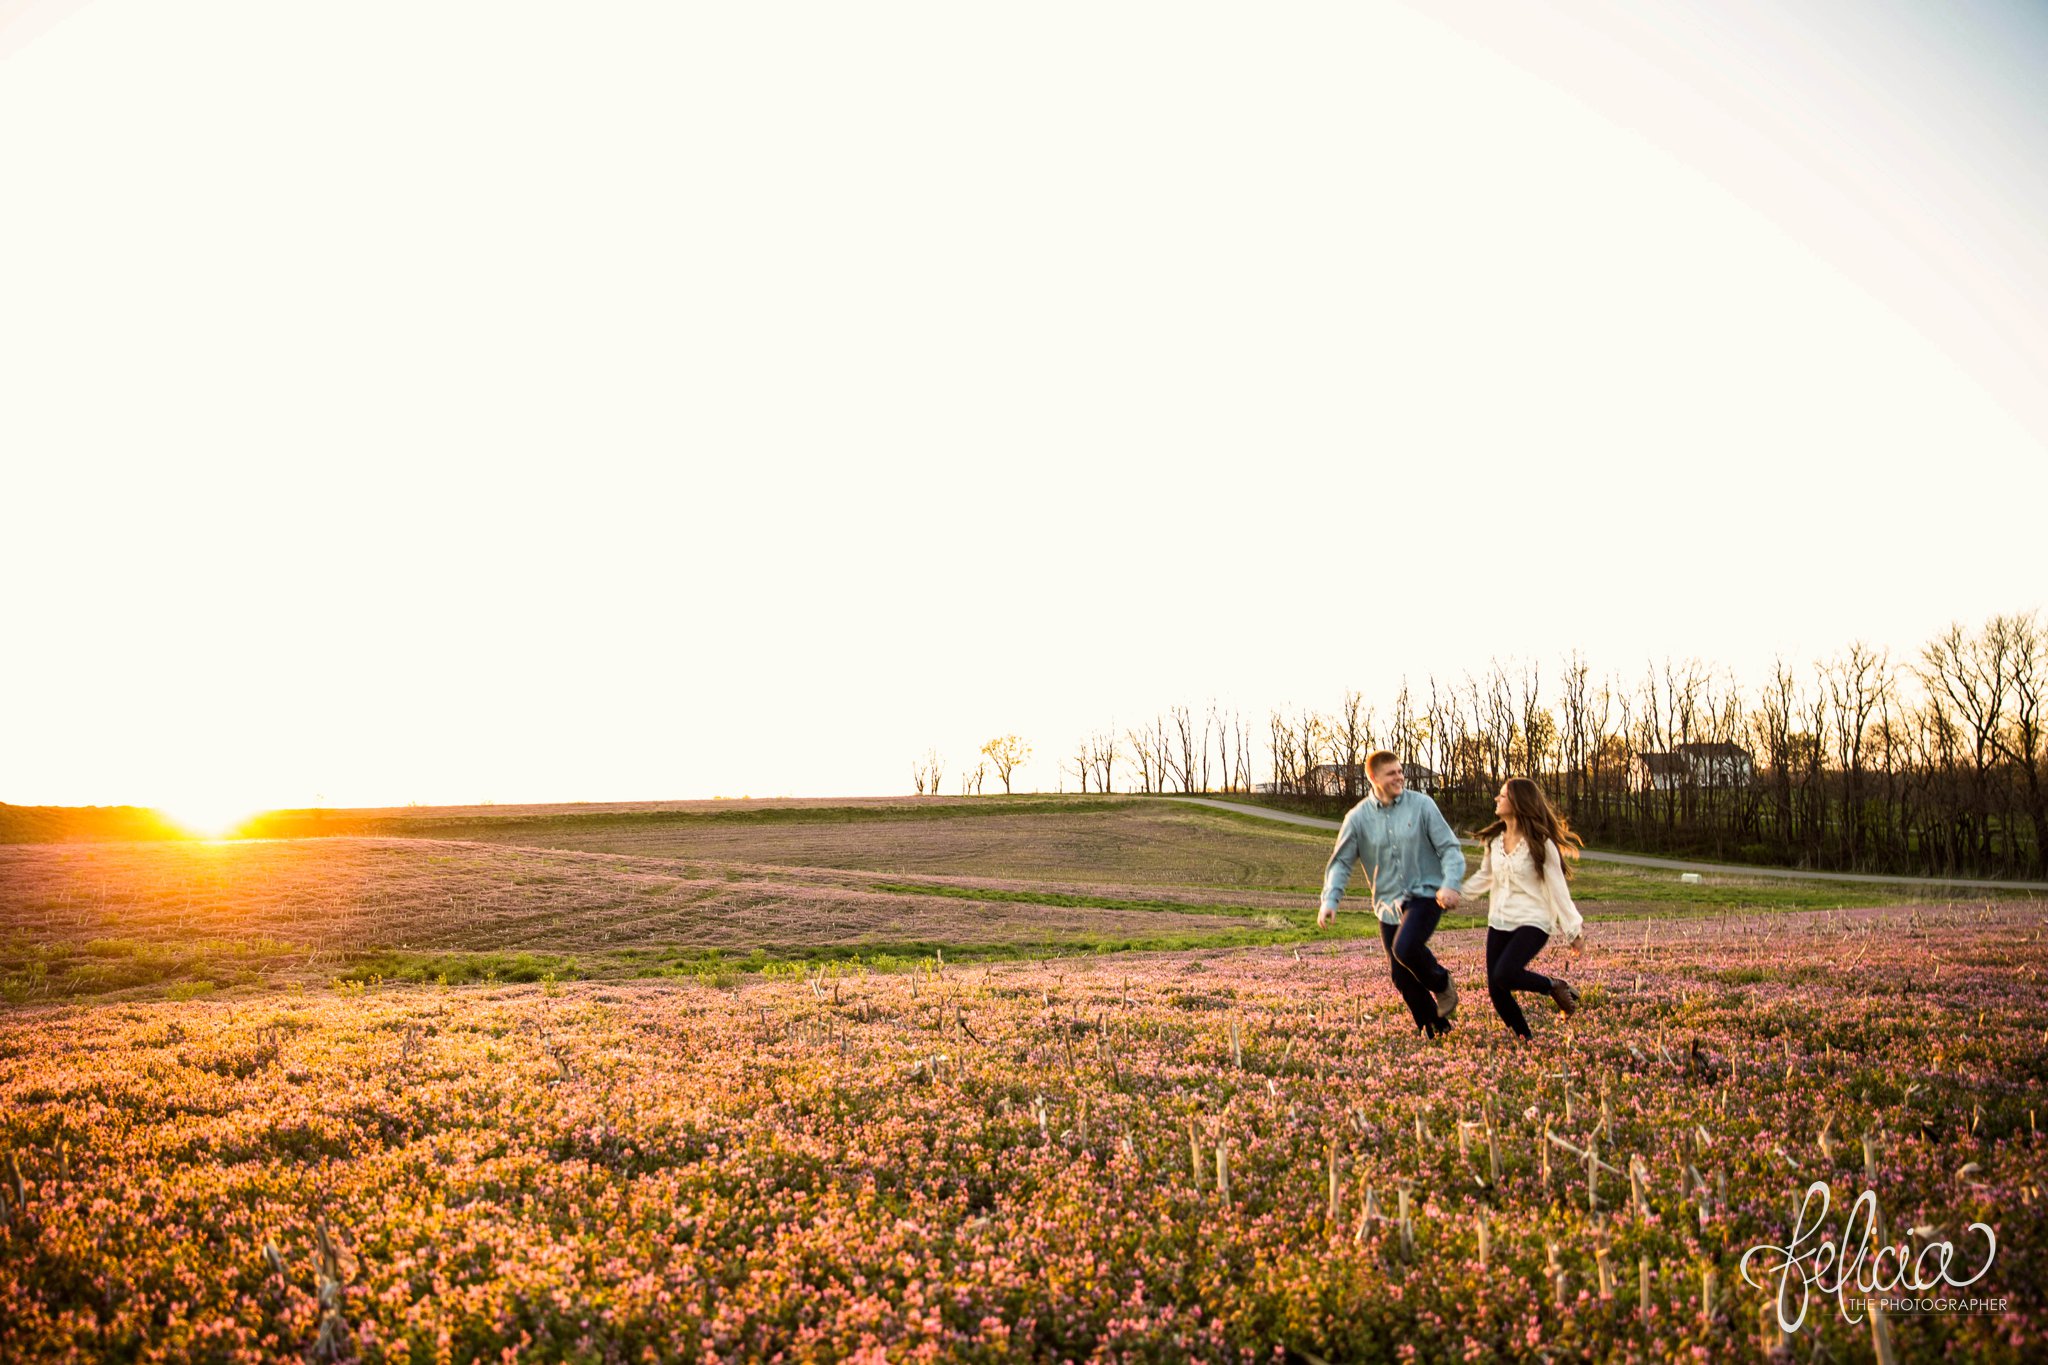 Romantic Engagement Photography | Kansas City, MO | Frolicking through Field at Sunset | Images by www.feliciathephotographer.com